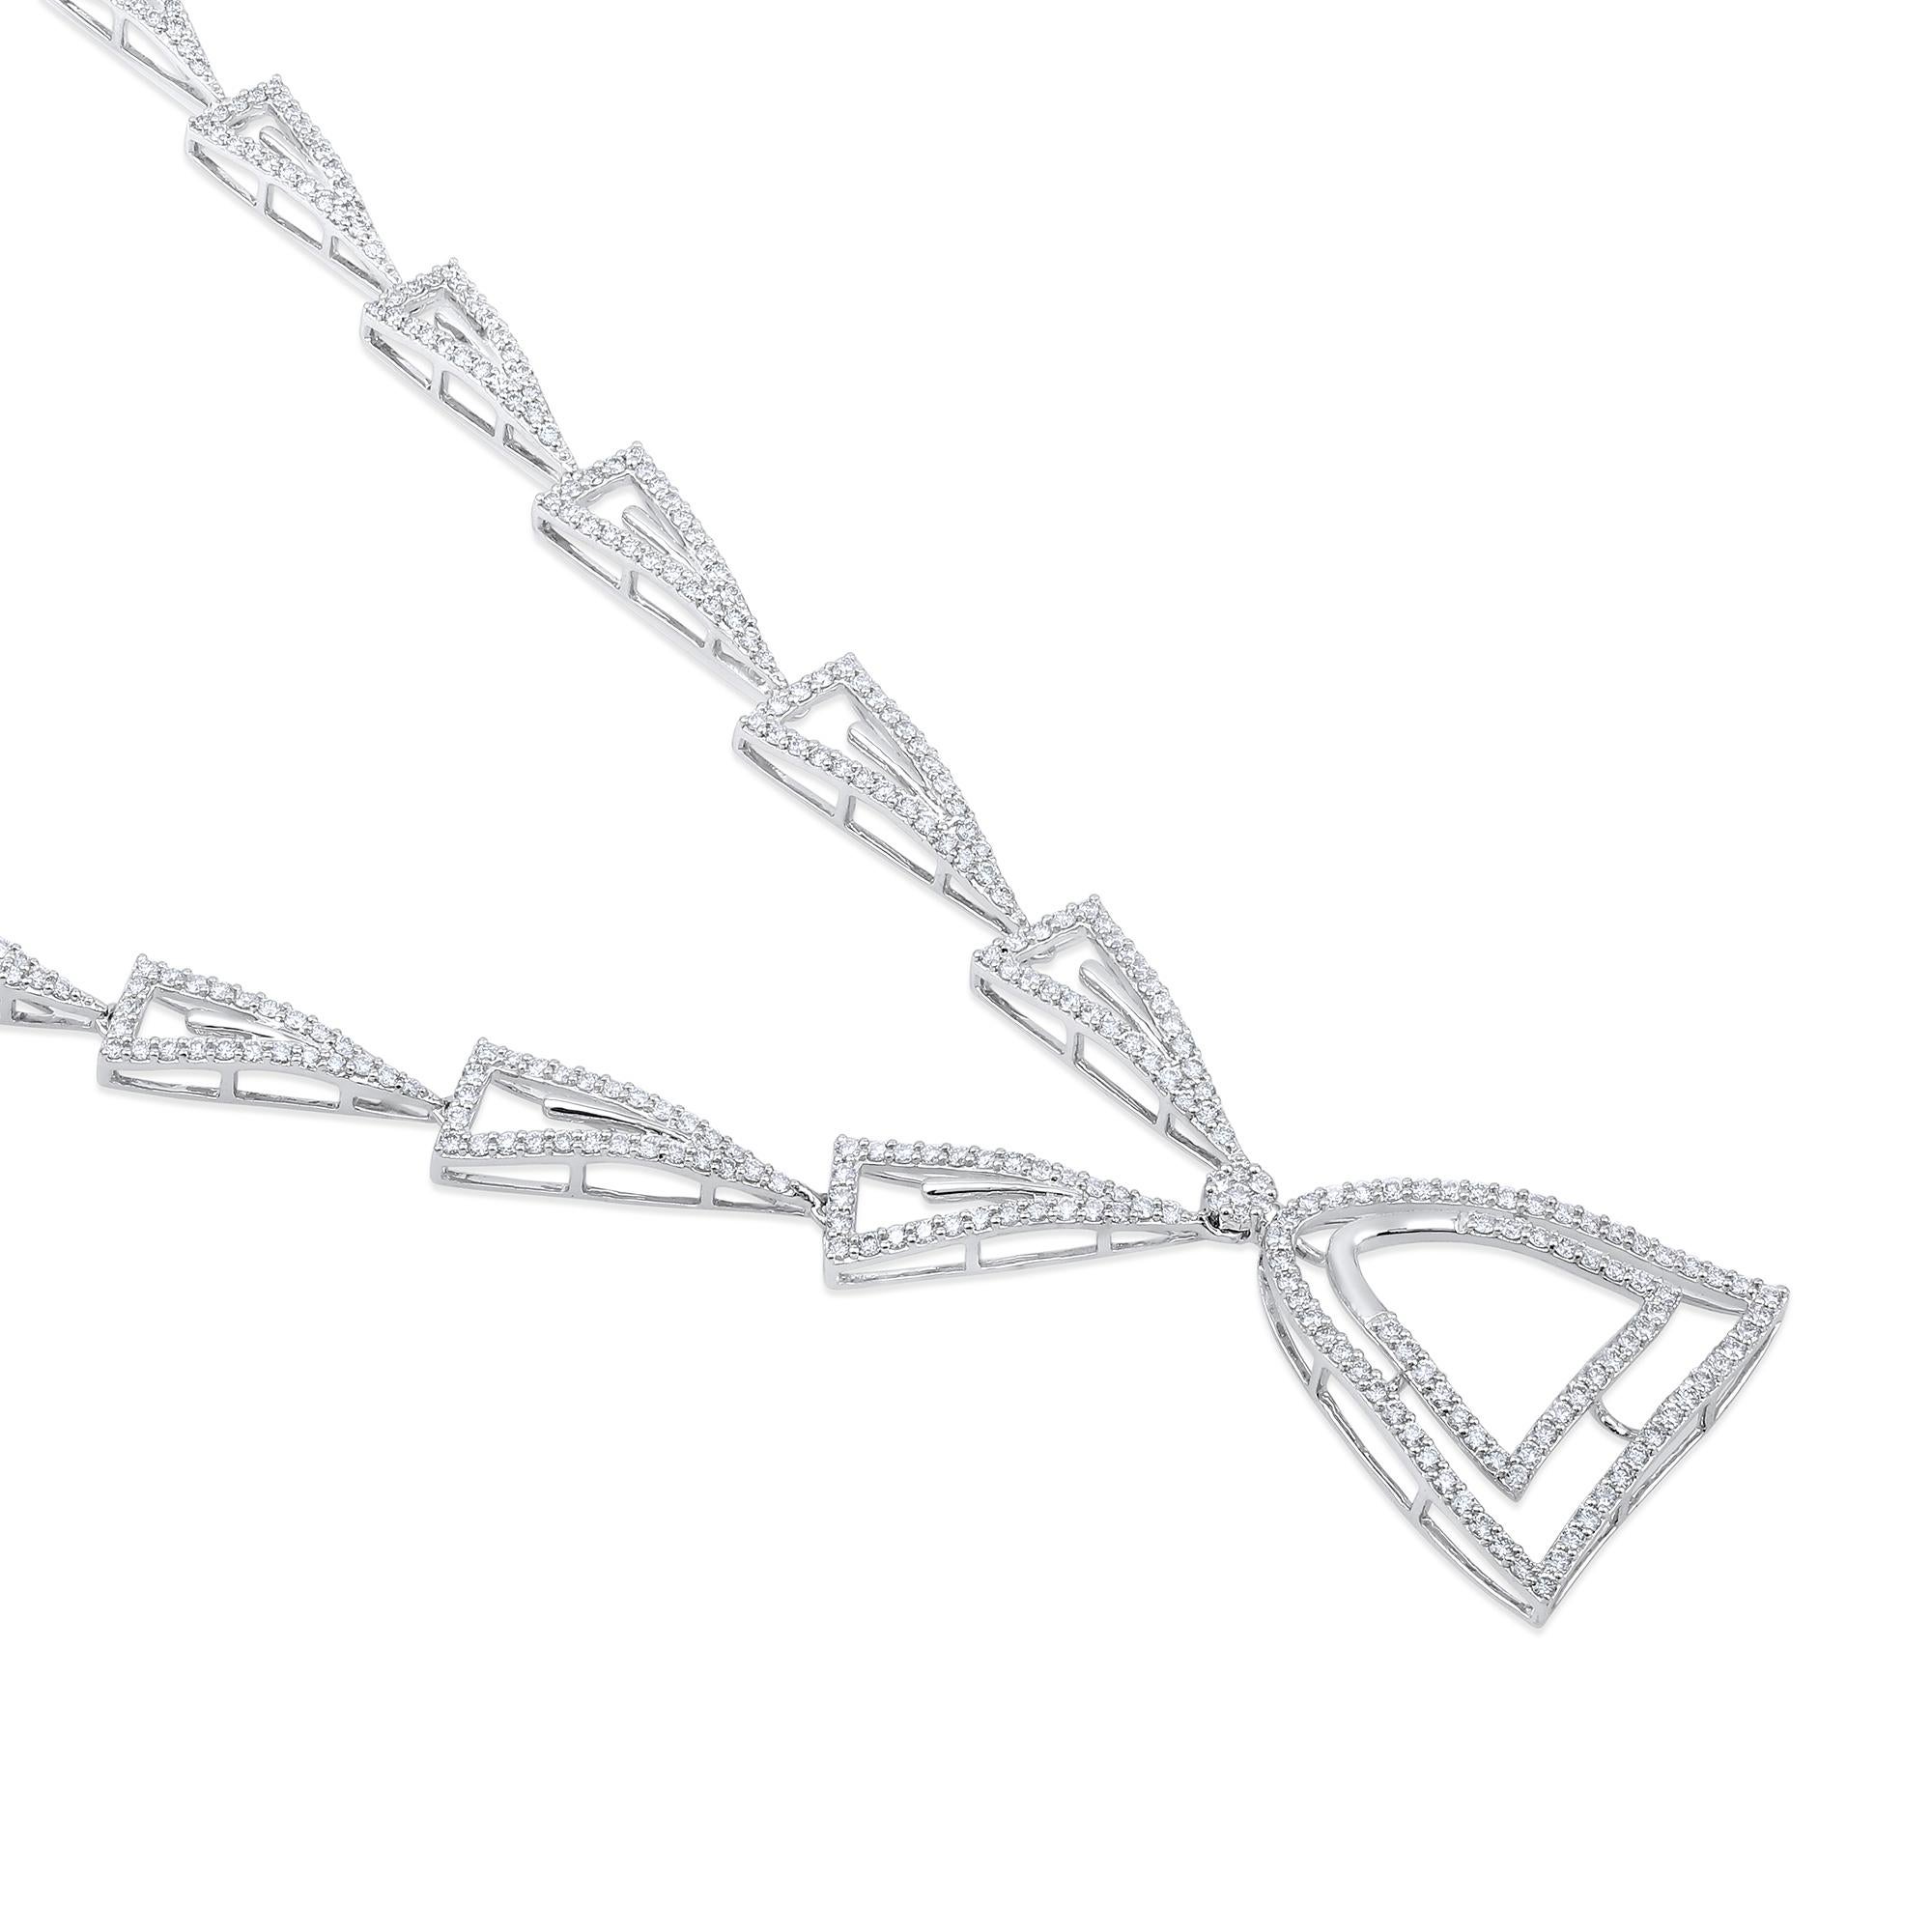 Crafted in 20.50 grams of 14-karat White Gold, contains 437 Stones of Round Diamonds with a total of 2.92-Carats in G-H Color and VS Clarity. The Necklace is 18-inch in Length.

CONTEMPORARY AND TIMELESS ESSENCE: Crafted in 14-karat/18-karat with